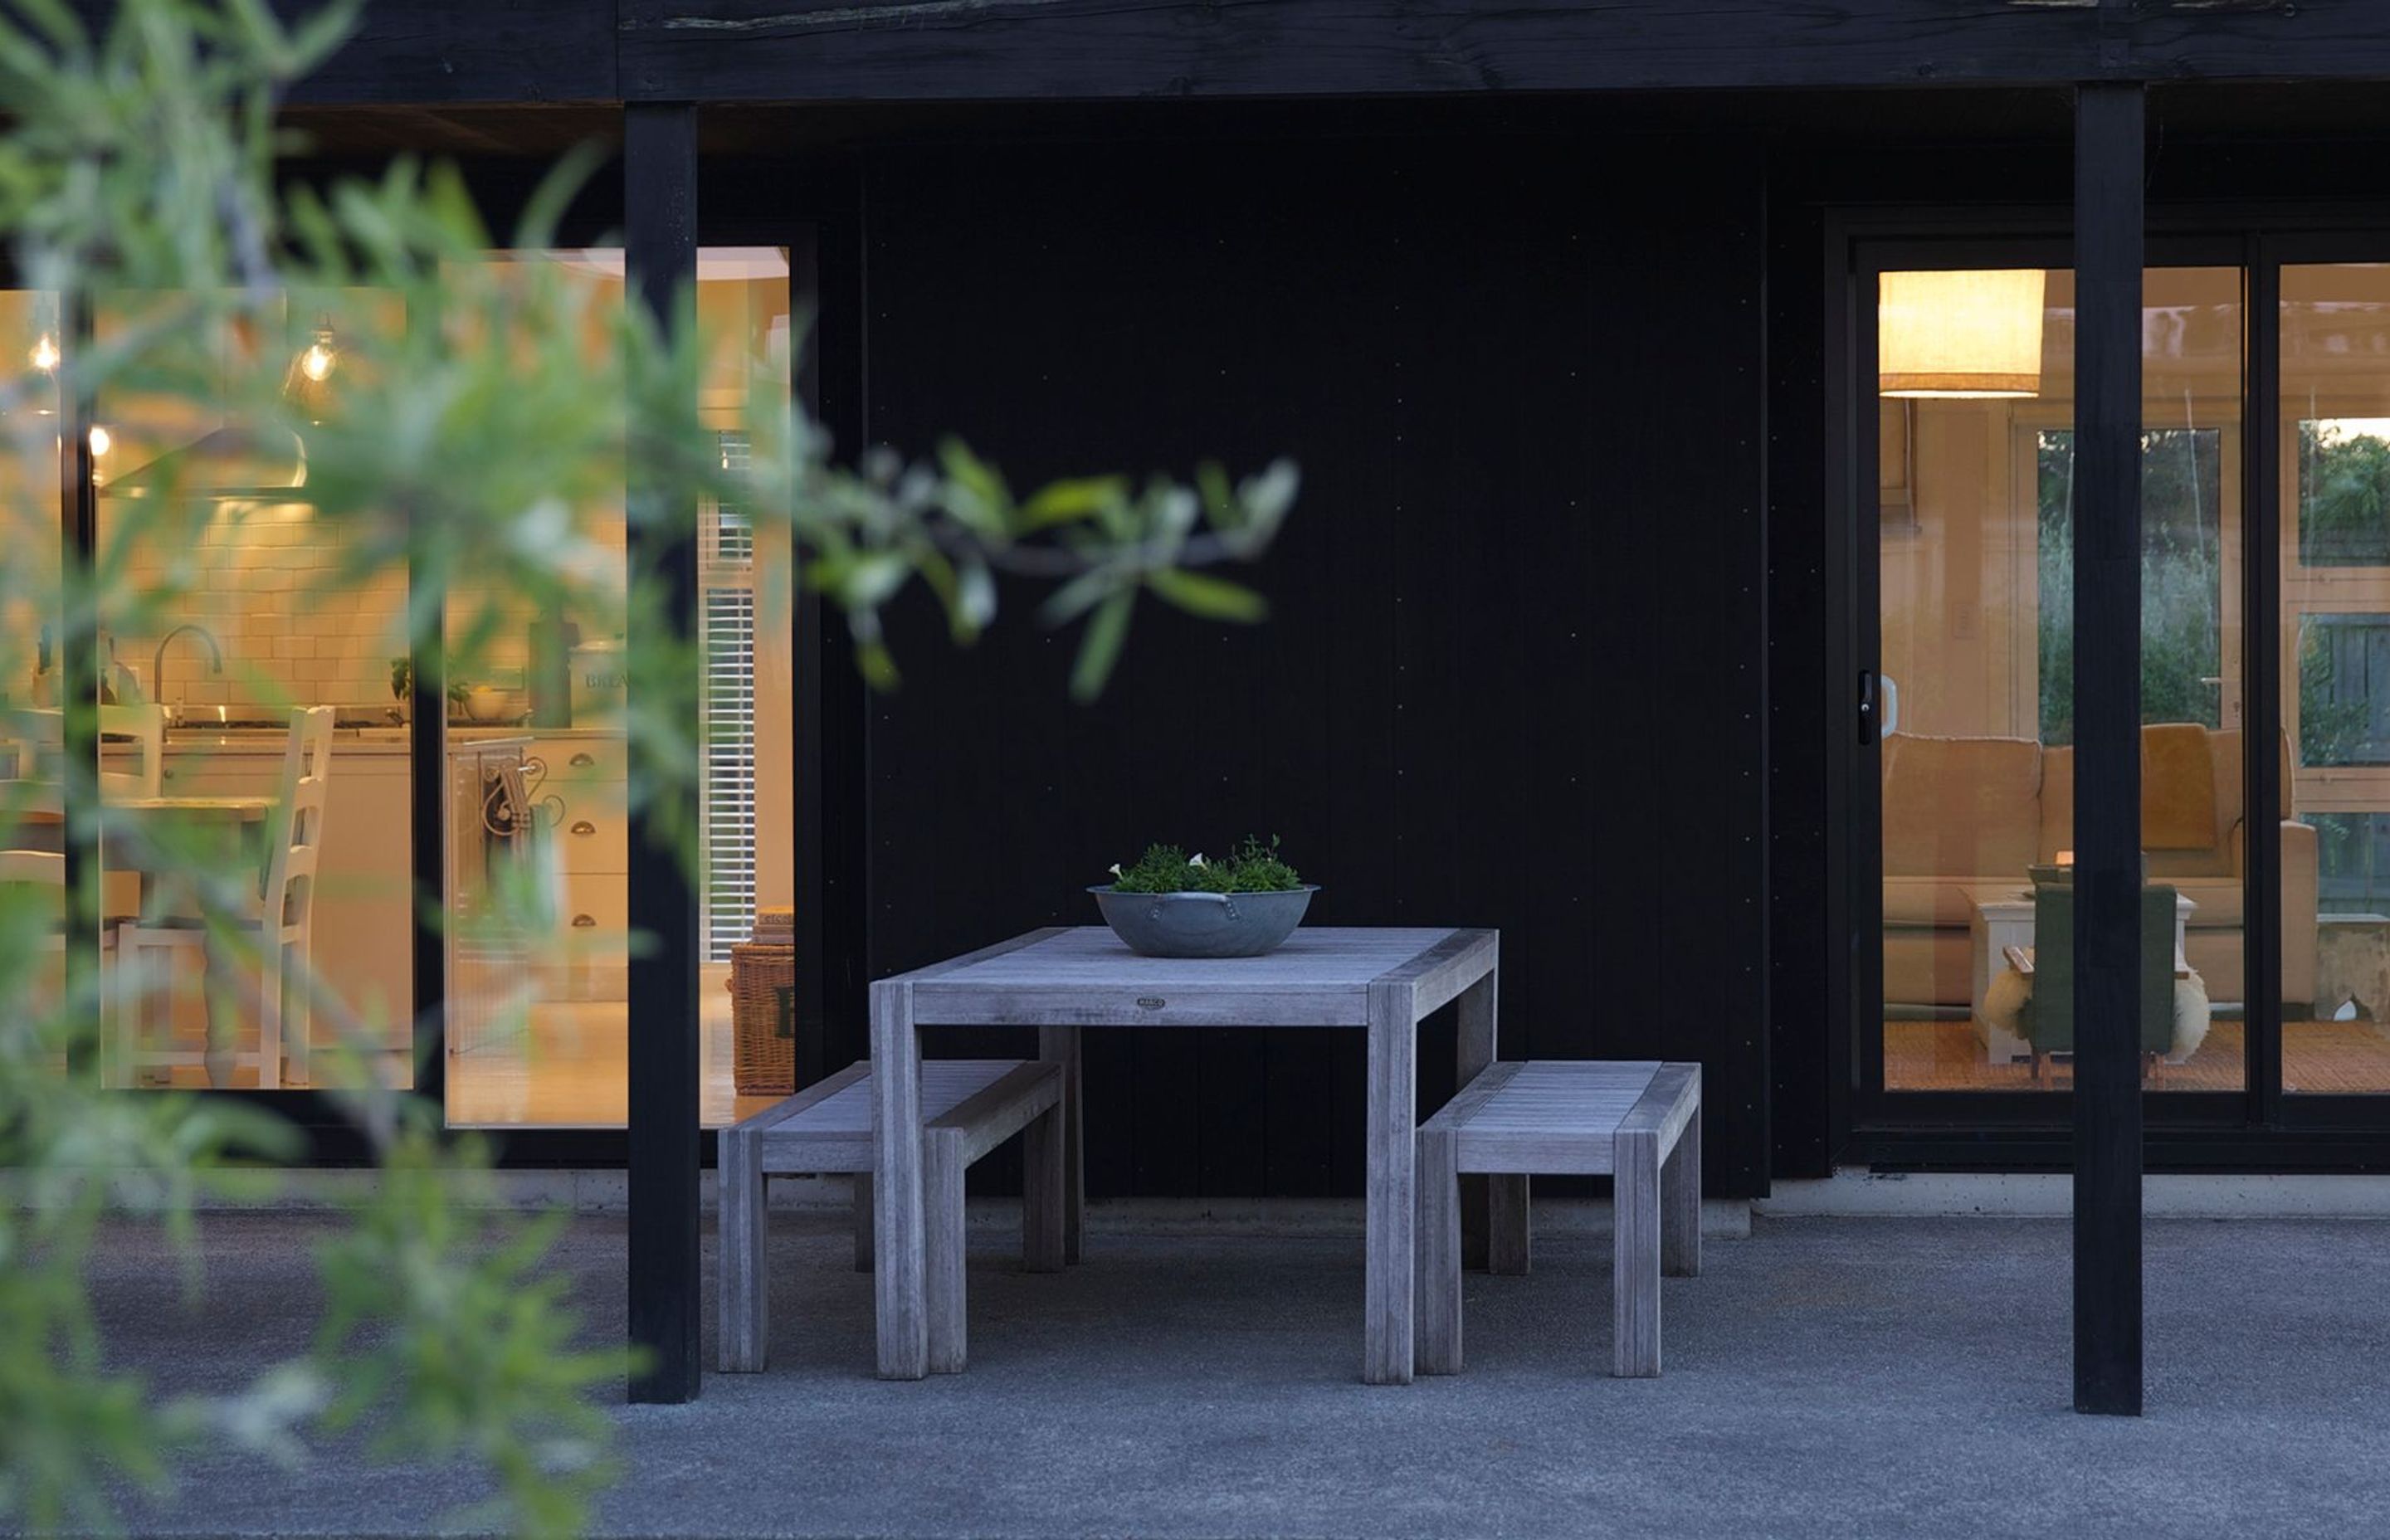 The sheltered outdoor dining area enjoys views of the rural Wairarapa landscape.